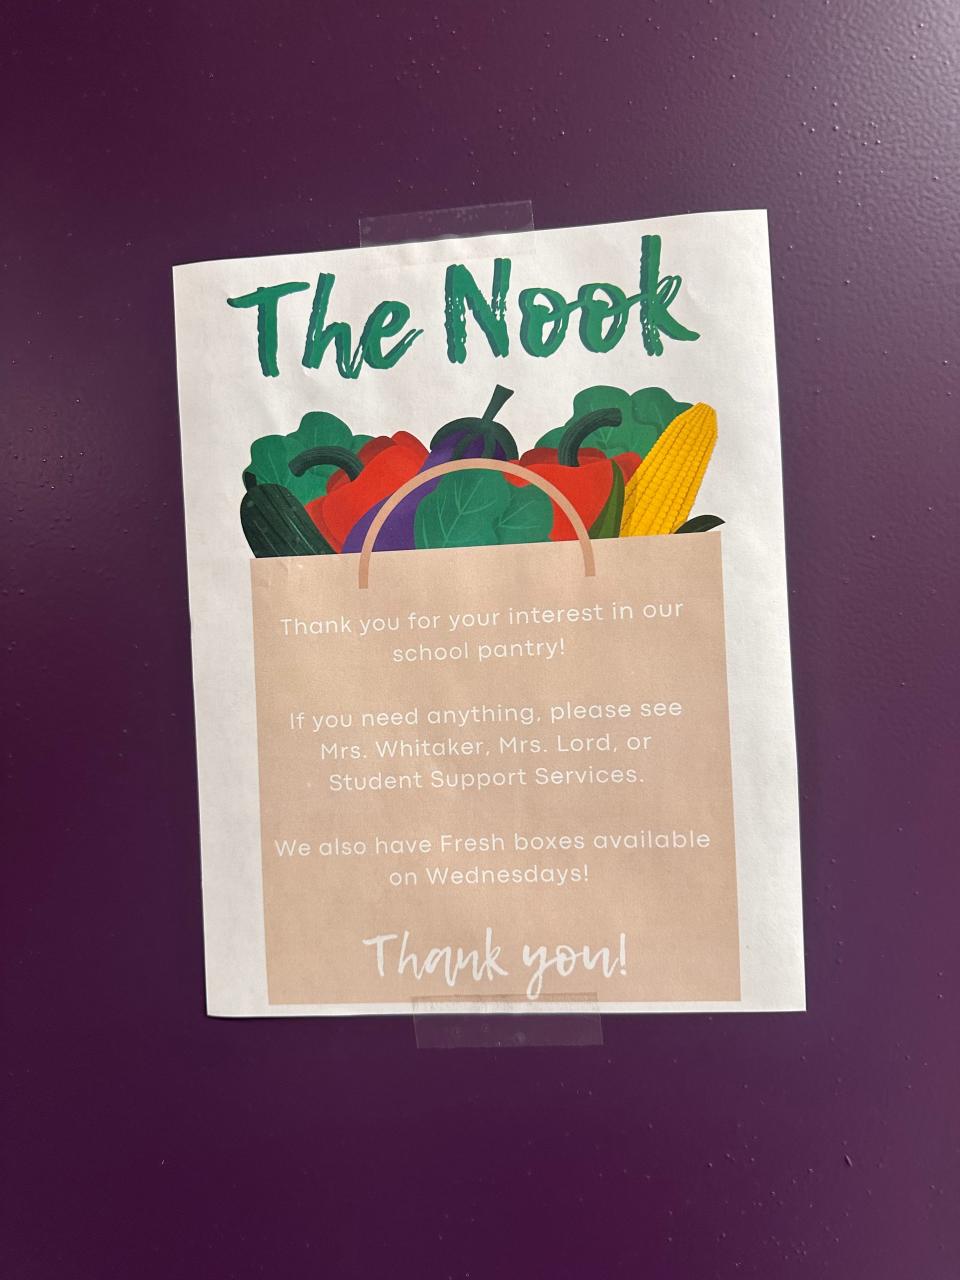 The Nook, a pantry providing free items for students at Monty Tech, is located near the school's cafeteria and culinary office.